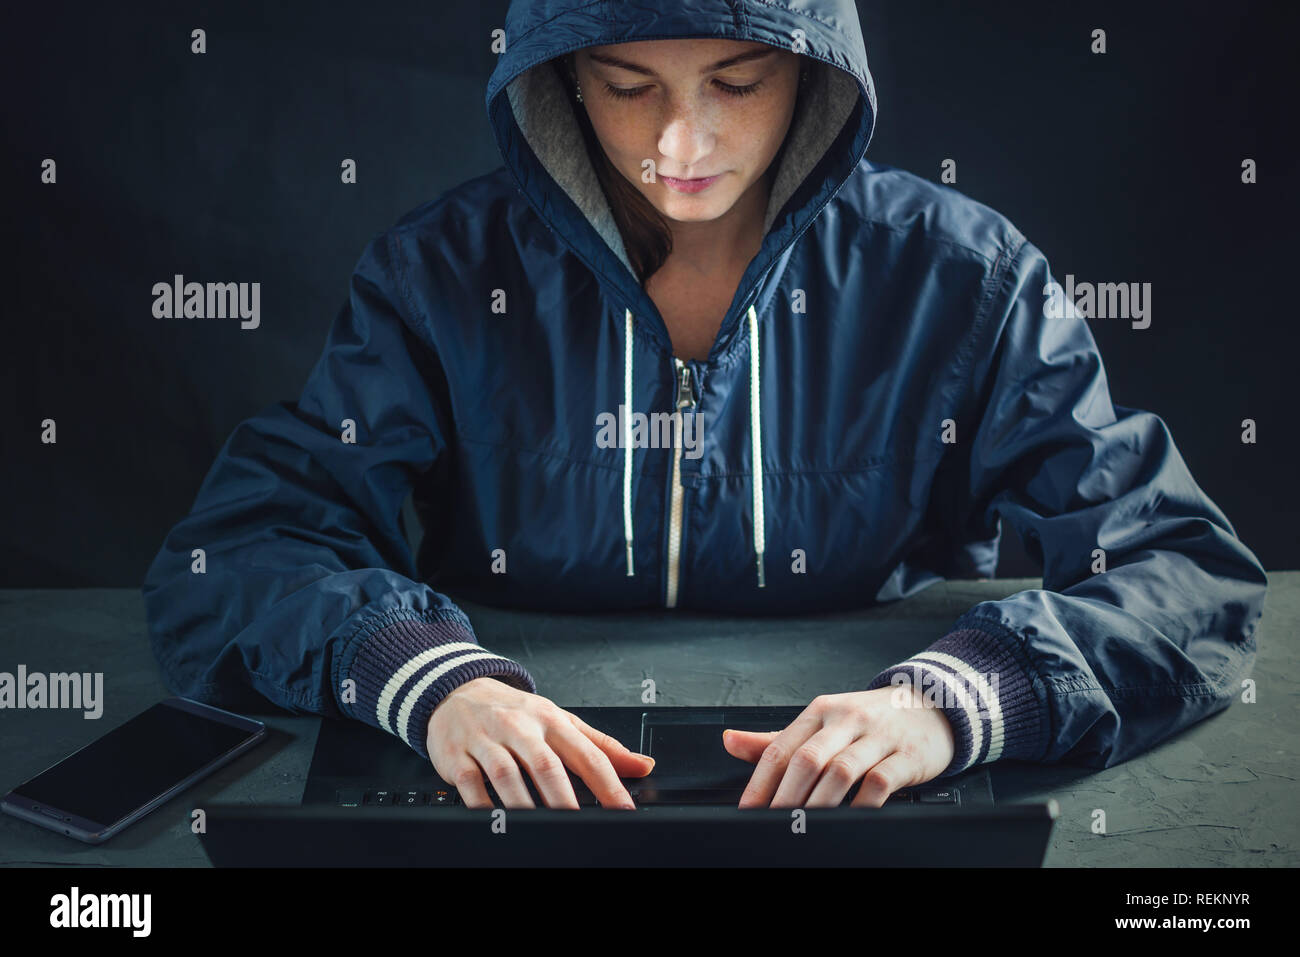 Hacker teen programmer uses a laptop to hack the system. Stealing personal data. Creation and infection of malicious virus. The concept of cyber crime Stock Photo